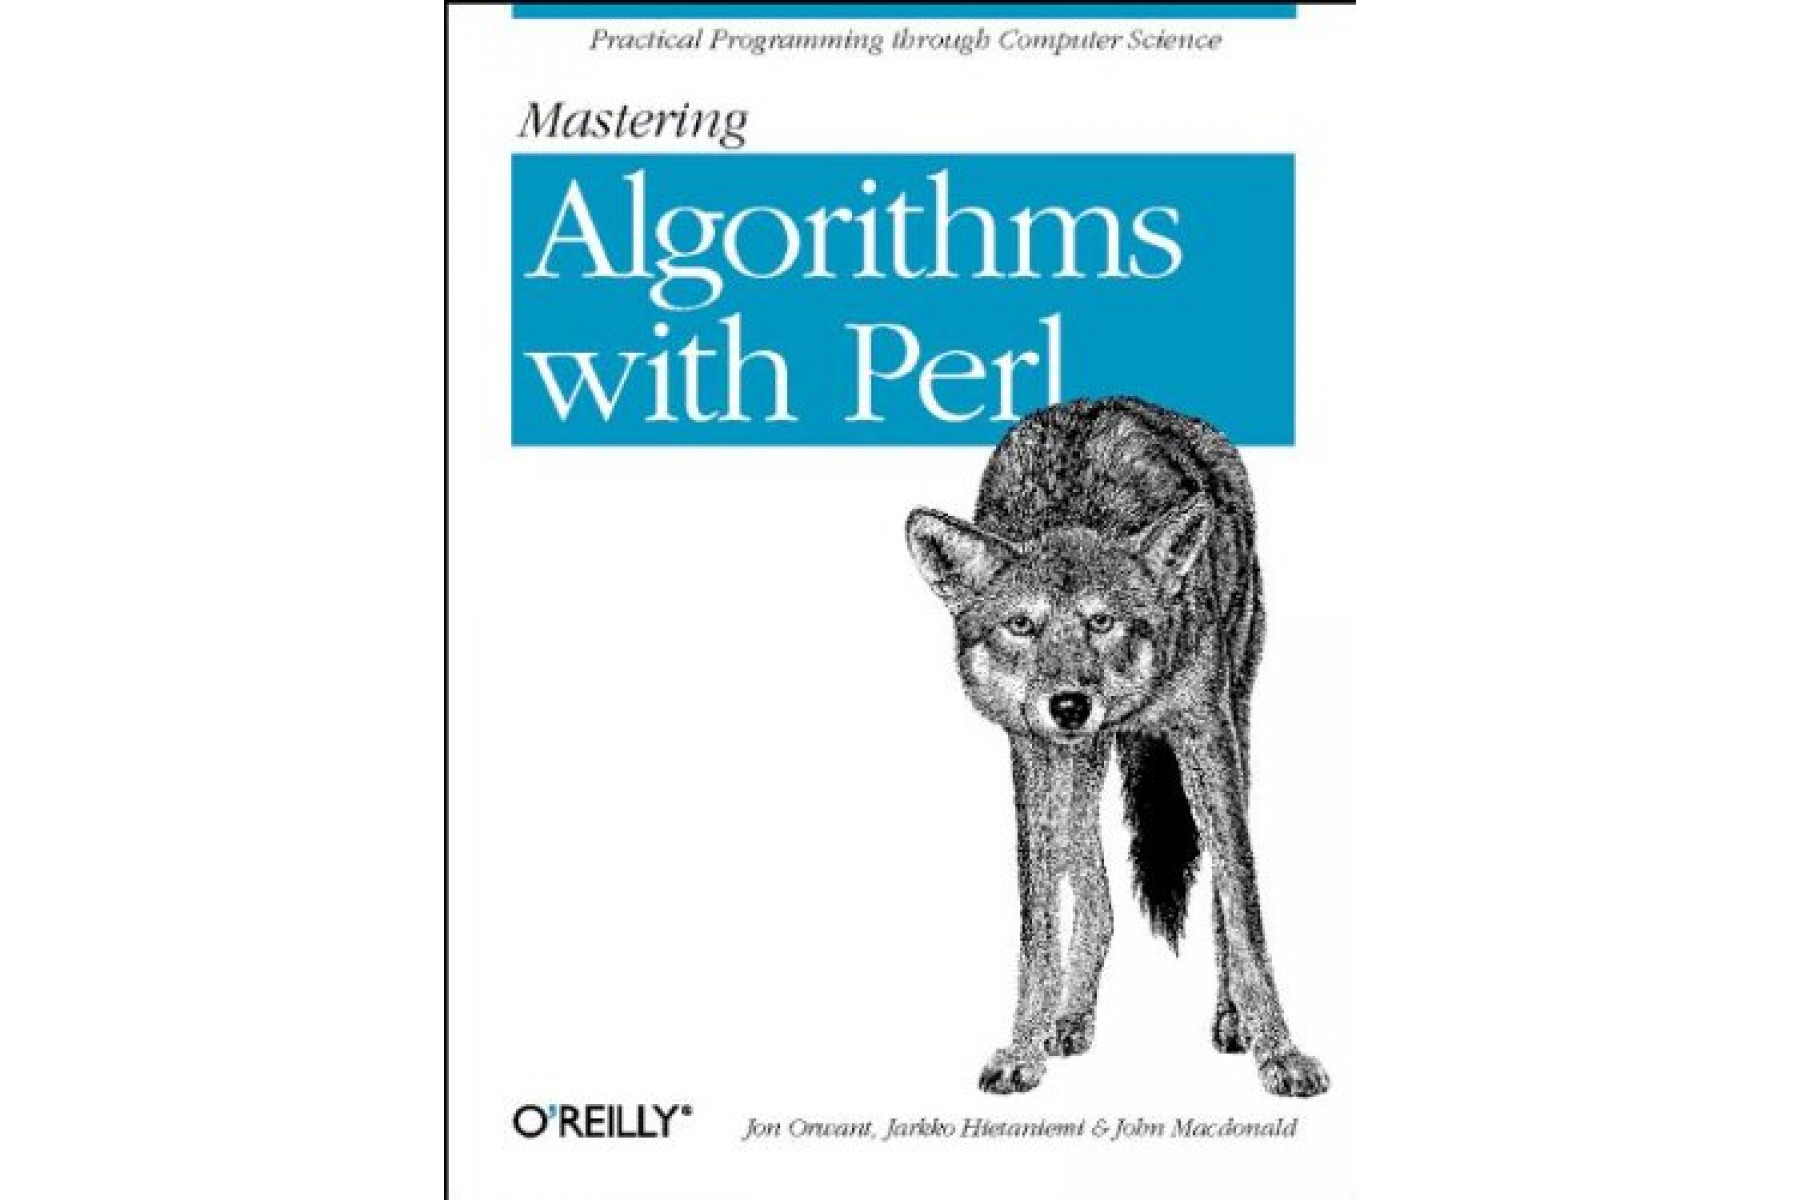 Mastering Algorithms with Perl: Practical Programming Through Computer Science